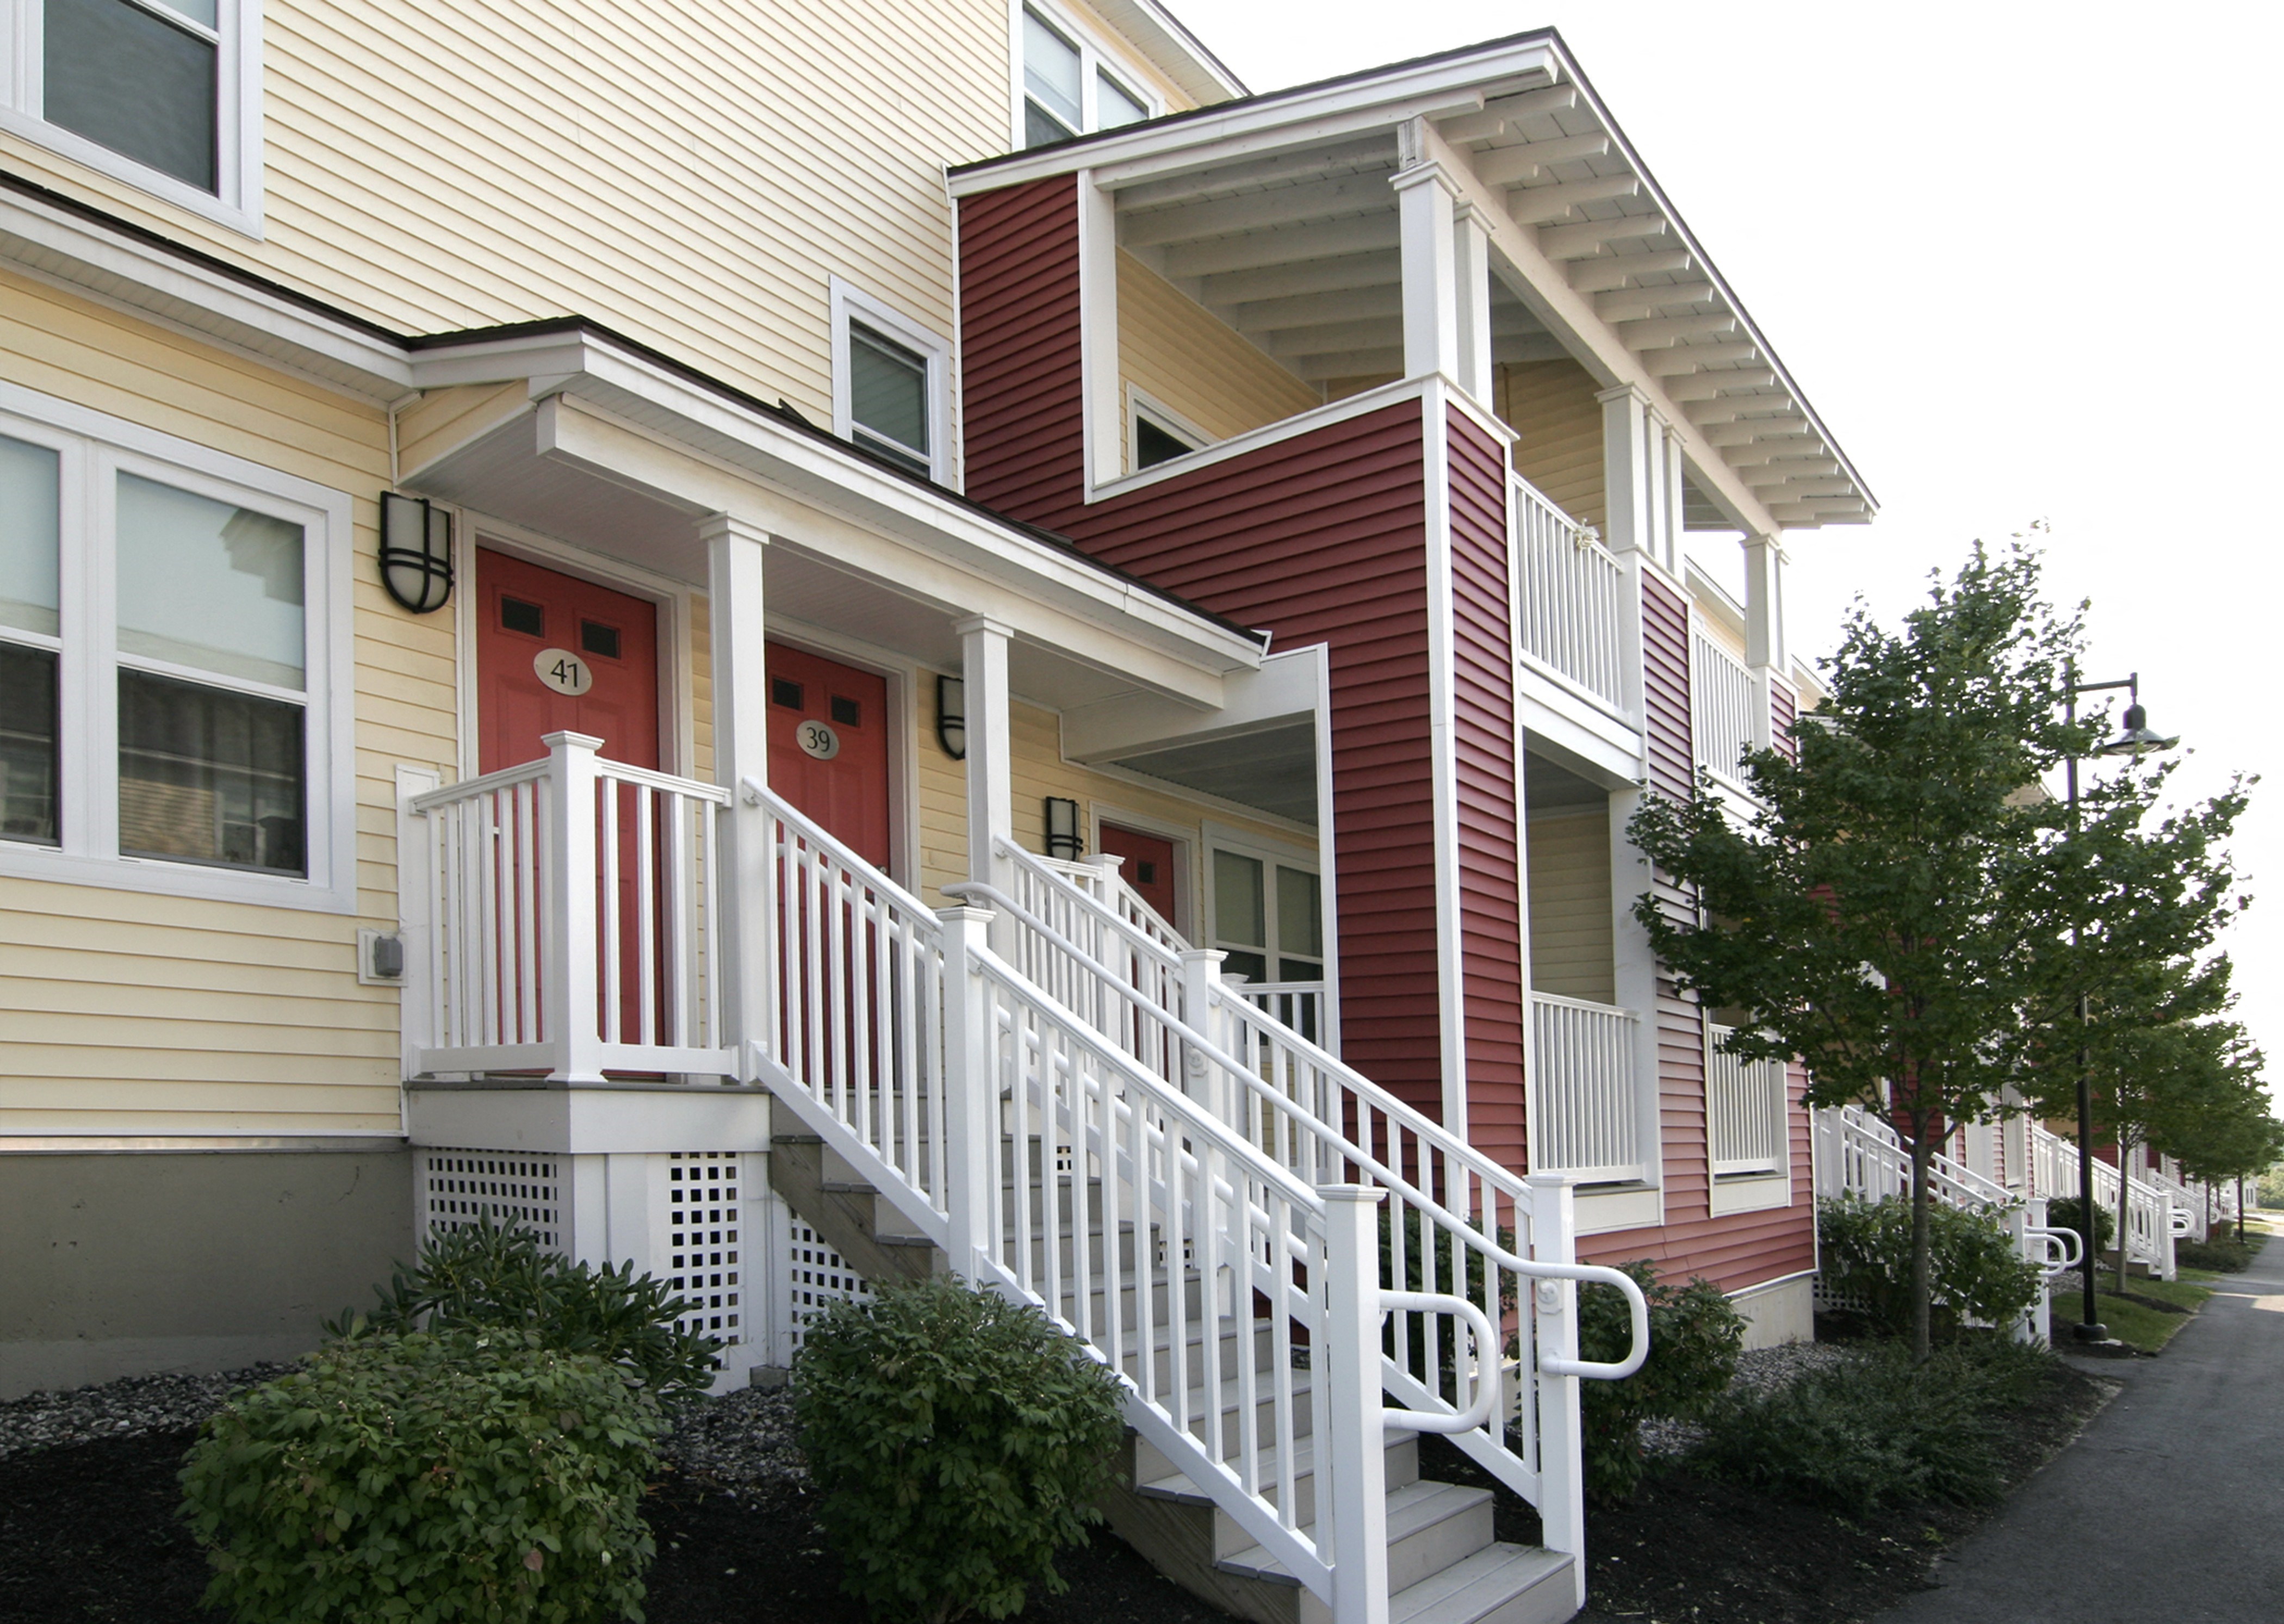 Brick Hill Townhouses  Apartments in South Portland, ME